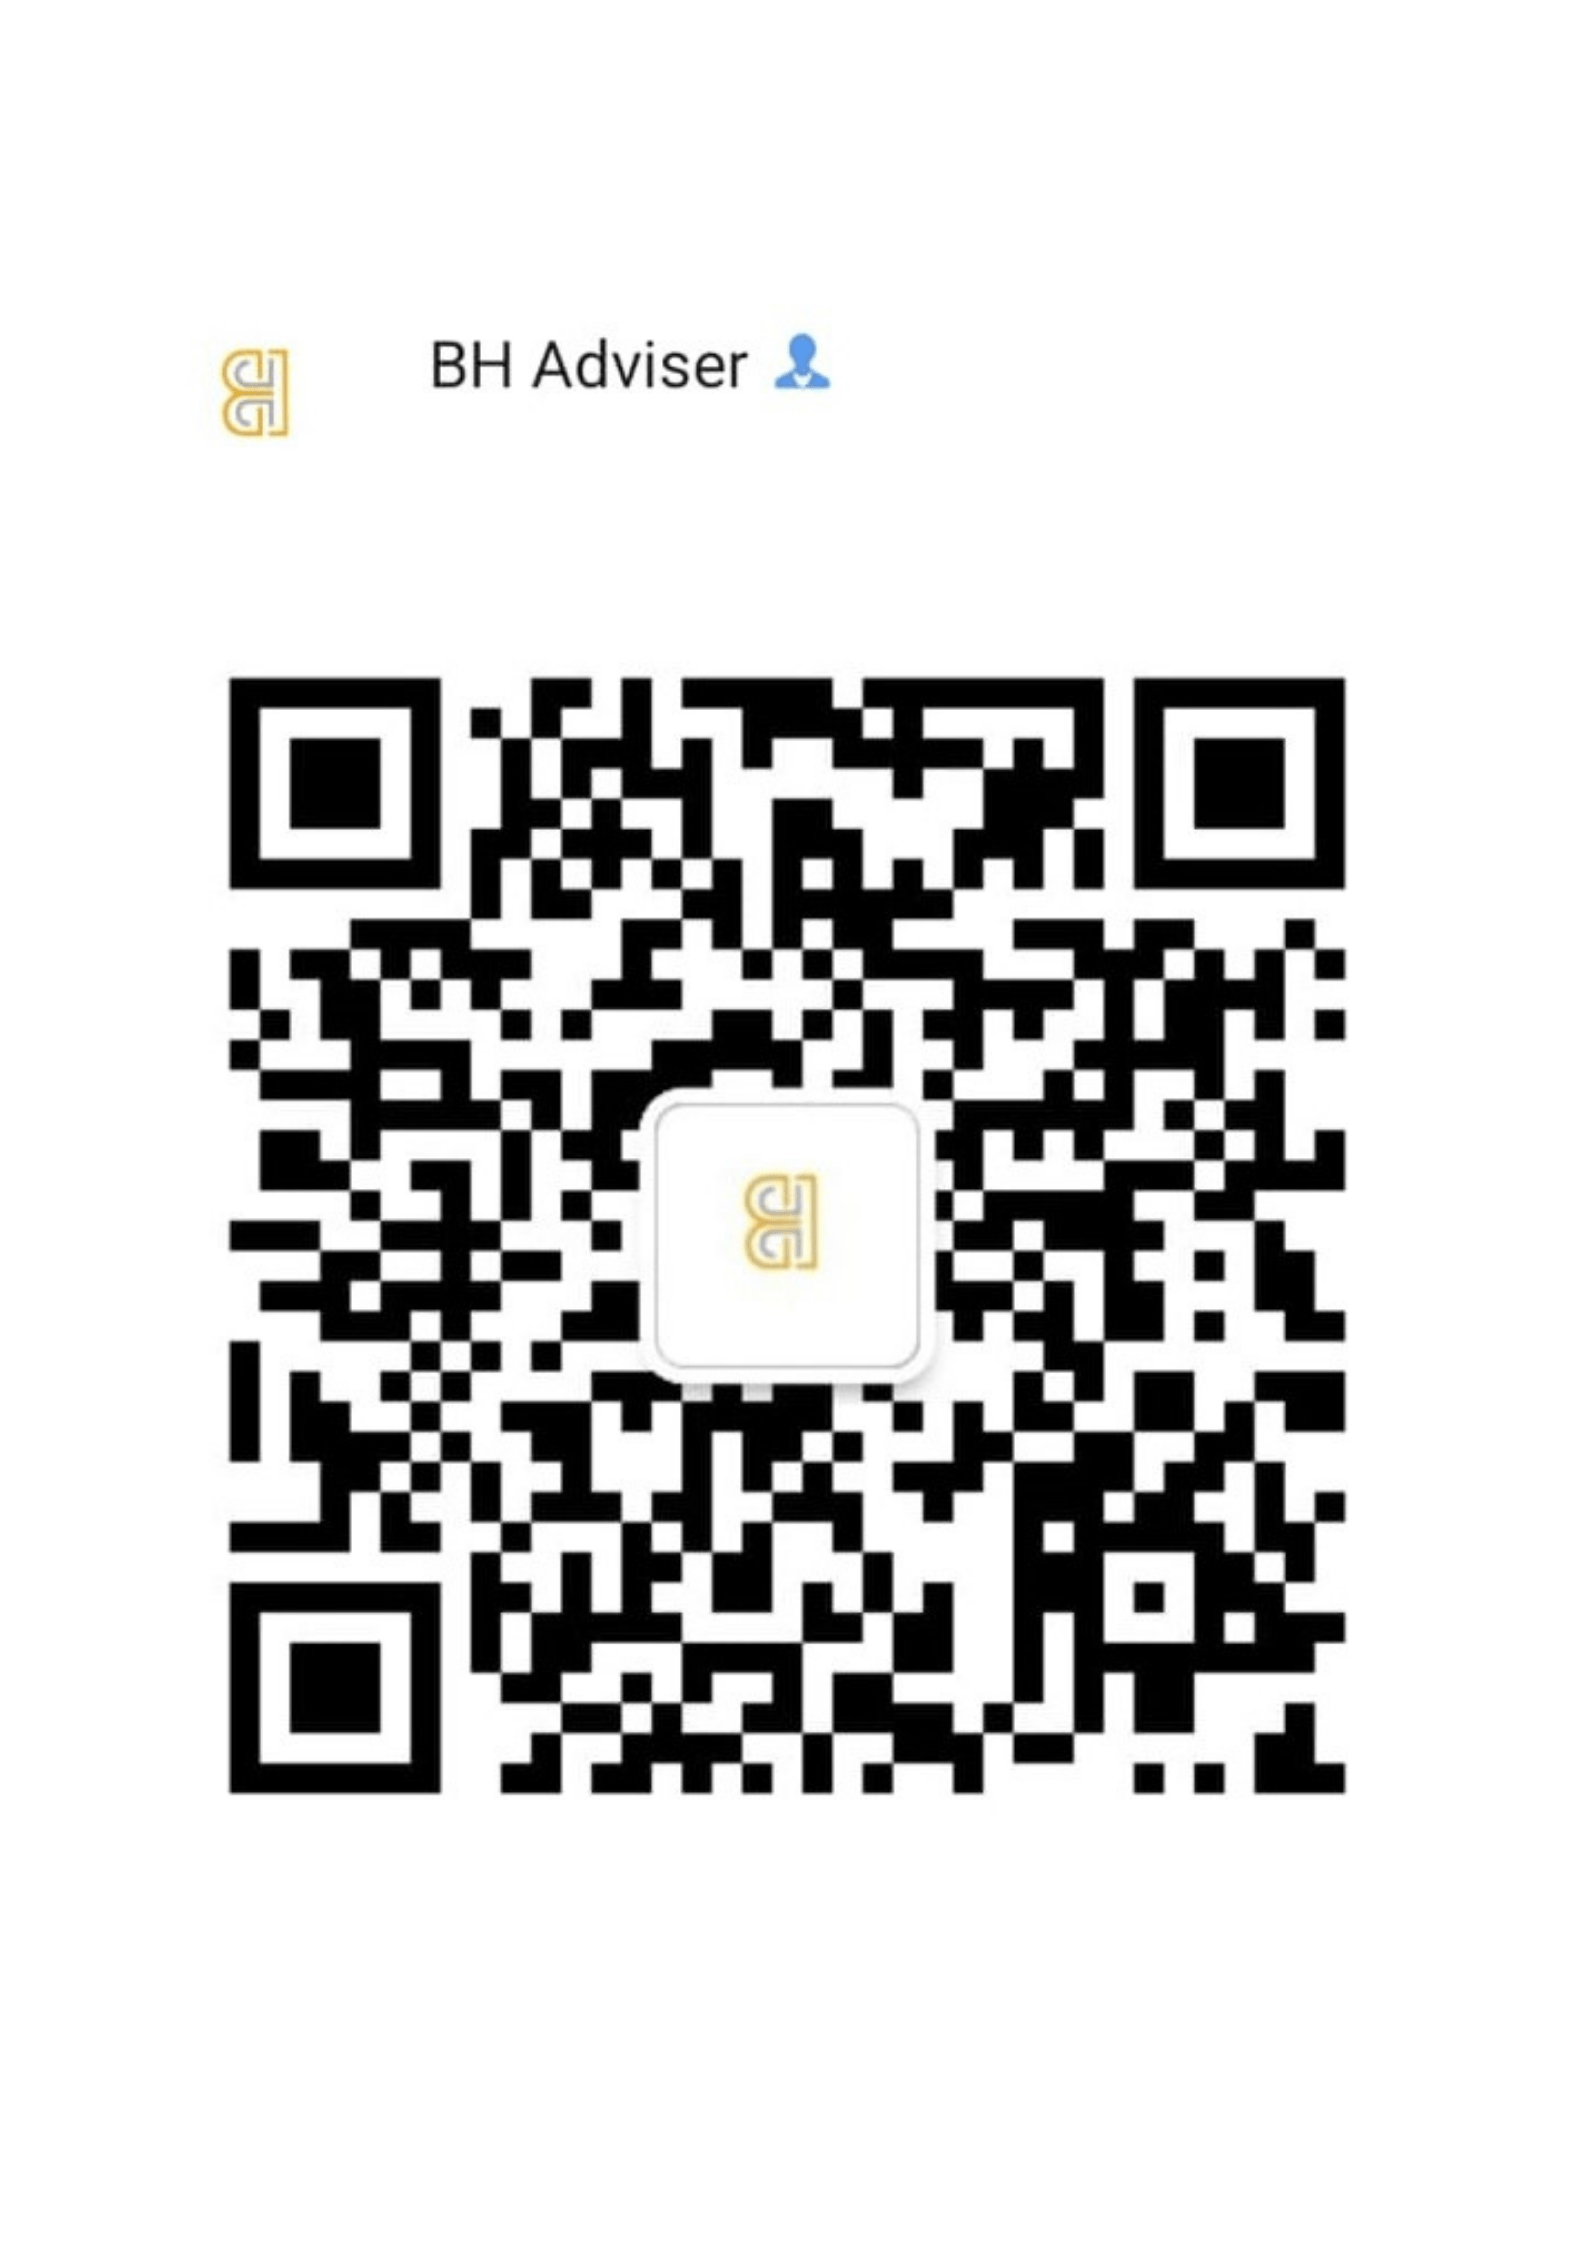 accountinfg firm in morocco wechat